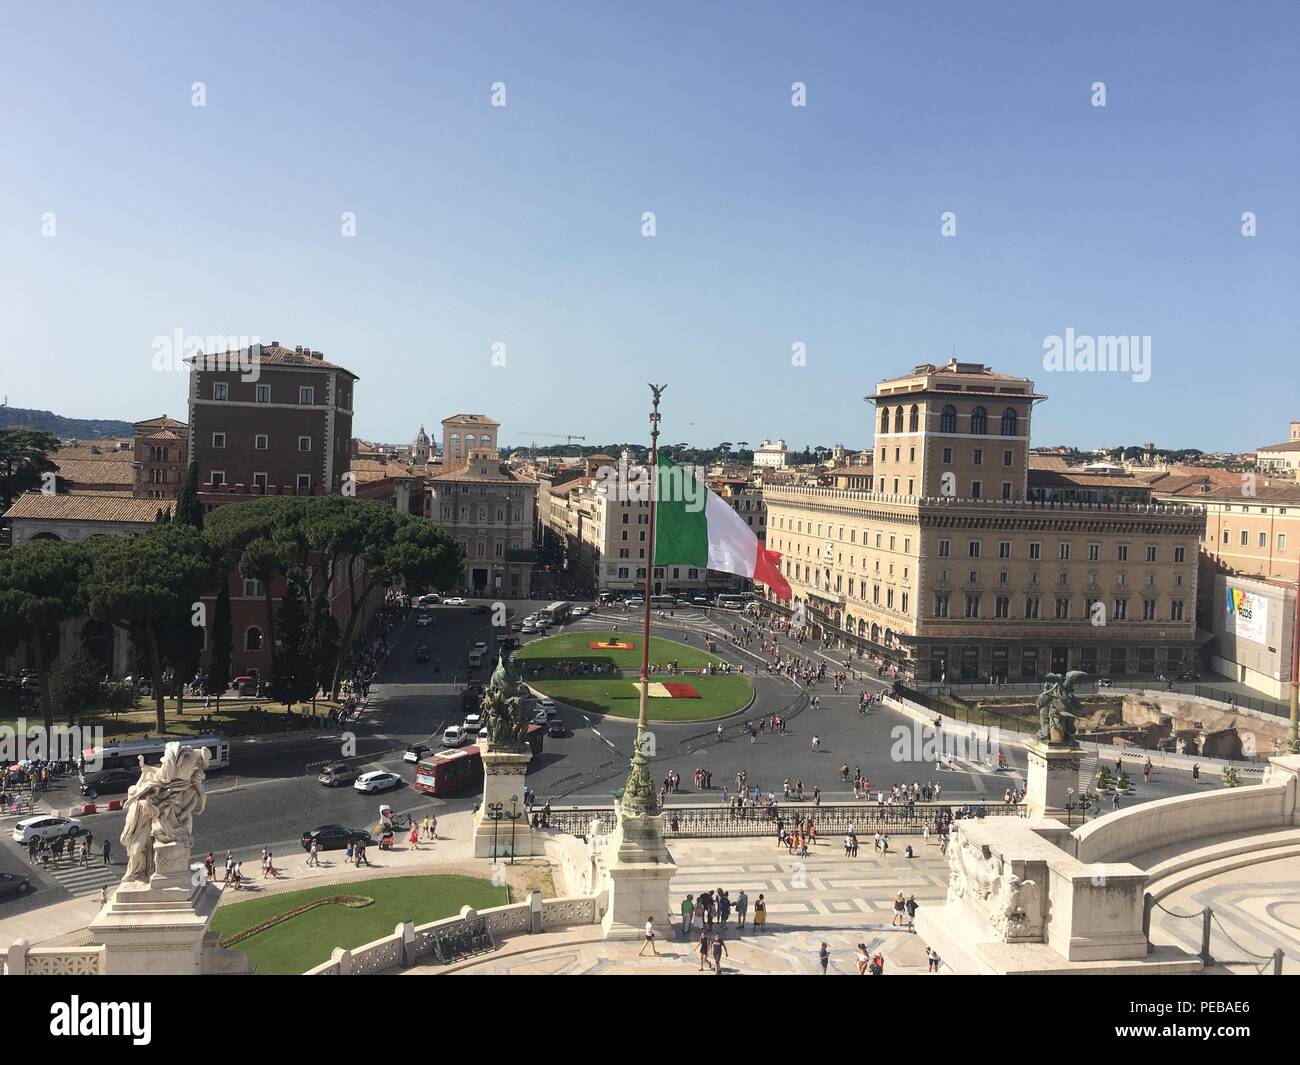 Rome, Rome, China. 14th Aug, 2018. Piazza Venezia is the central hub of Rome, Italy, in which several thoroughfares intersect, including the Via dei Fori Imperiali and the Via del Corso. It takes its name from the Palazzo Venezia, built by the Venetian Cardinal, Pietro Barbo (later Pope Paul II) alongside the church of Saint Mark, the patron saint of Venice. The Palazzo Venezia served as the embassy of the Republic of Venice in Rome. Credit: SIPA Asia/ZUMA Wire/Alamy Live News Stock Photo